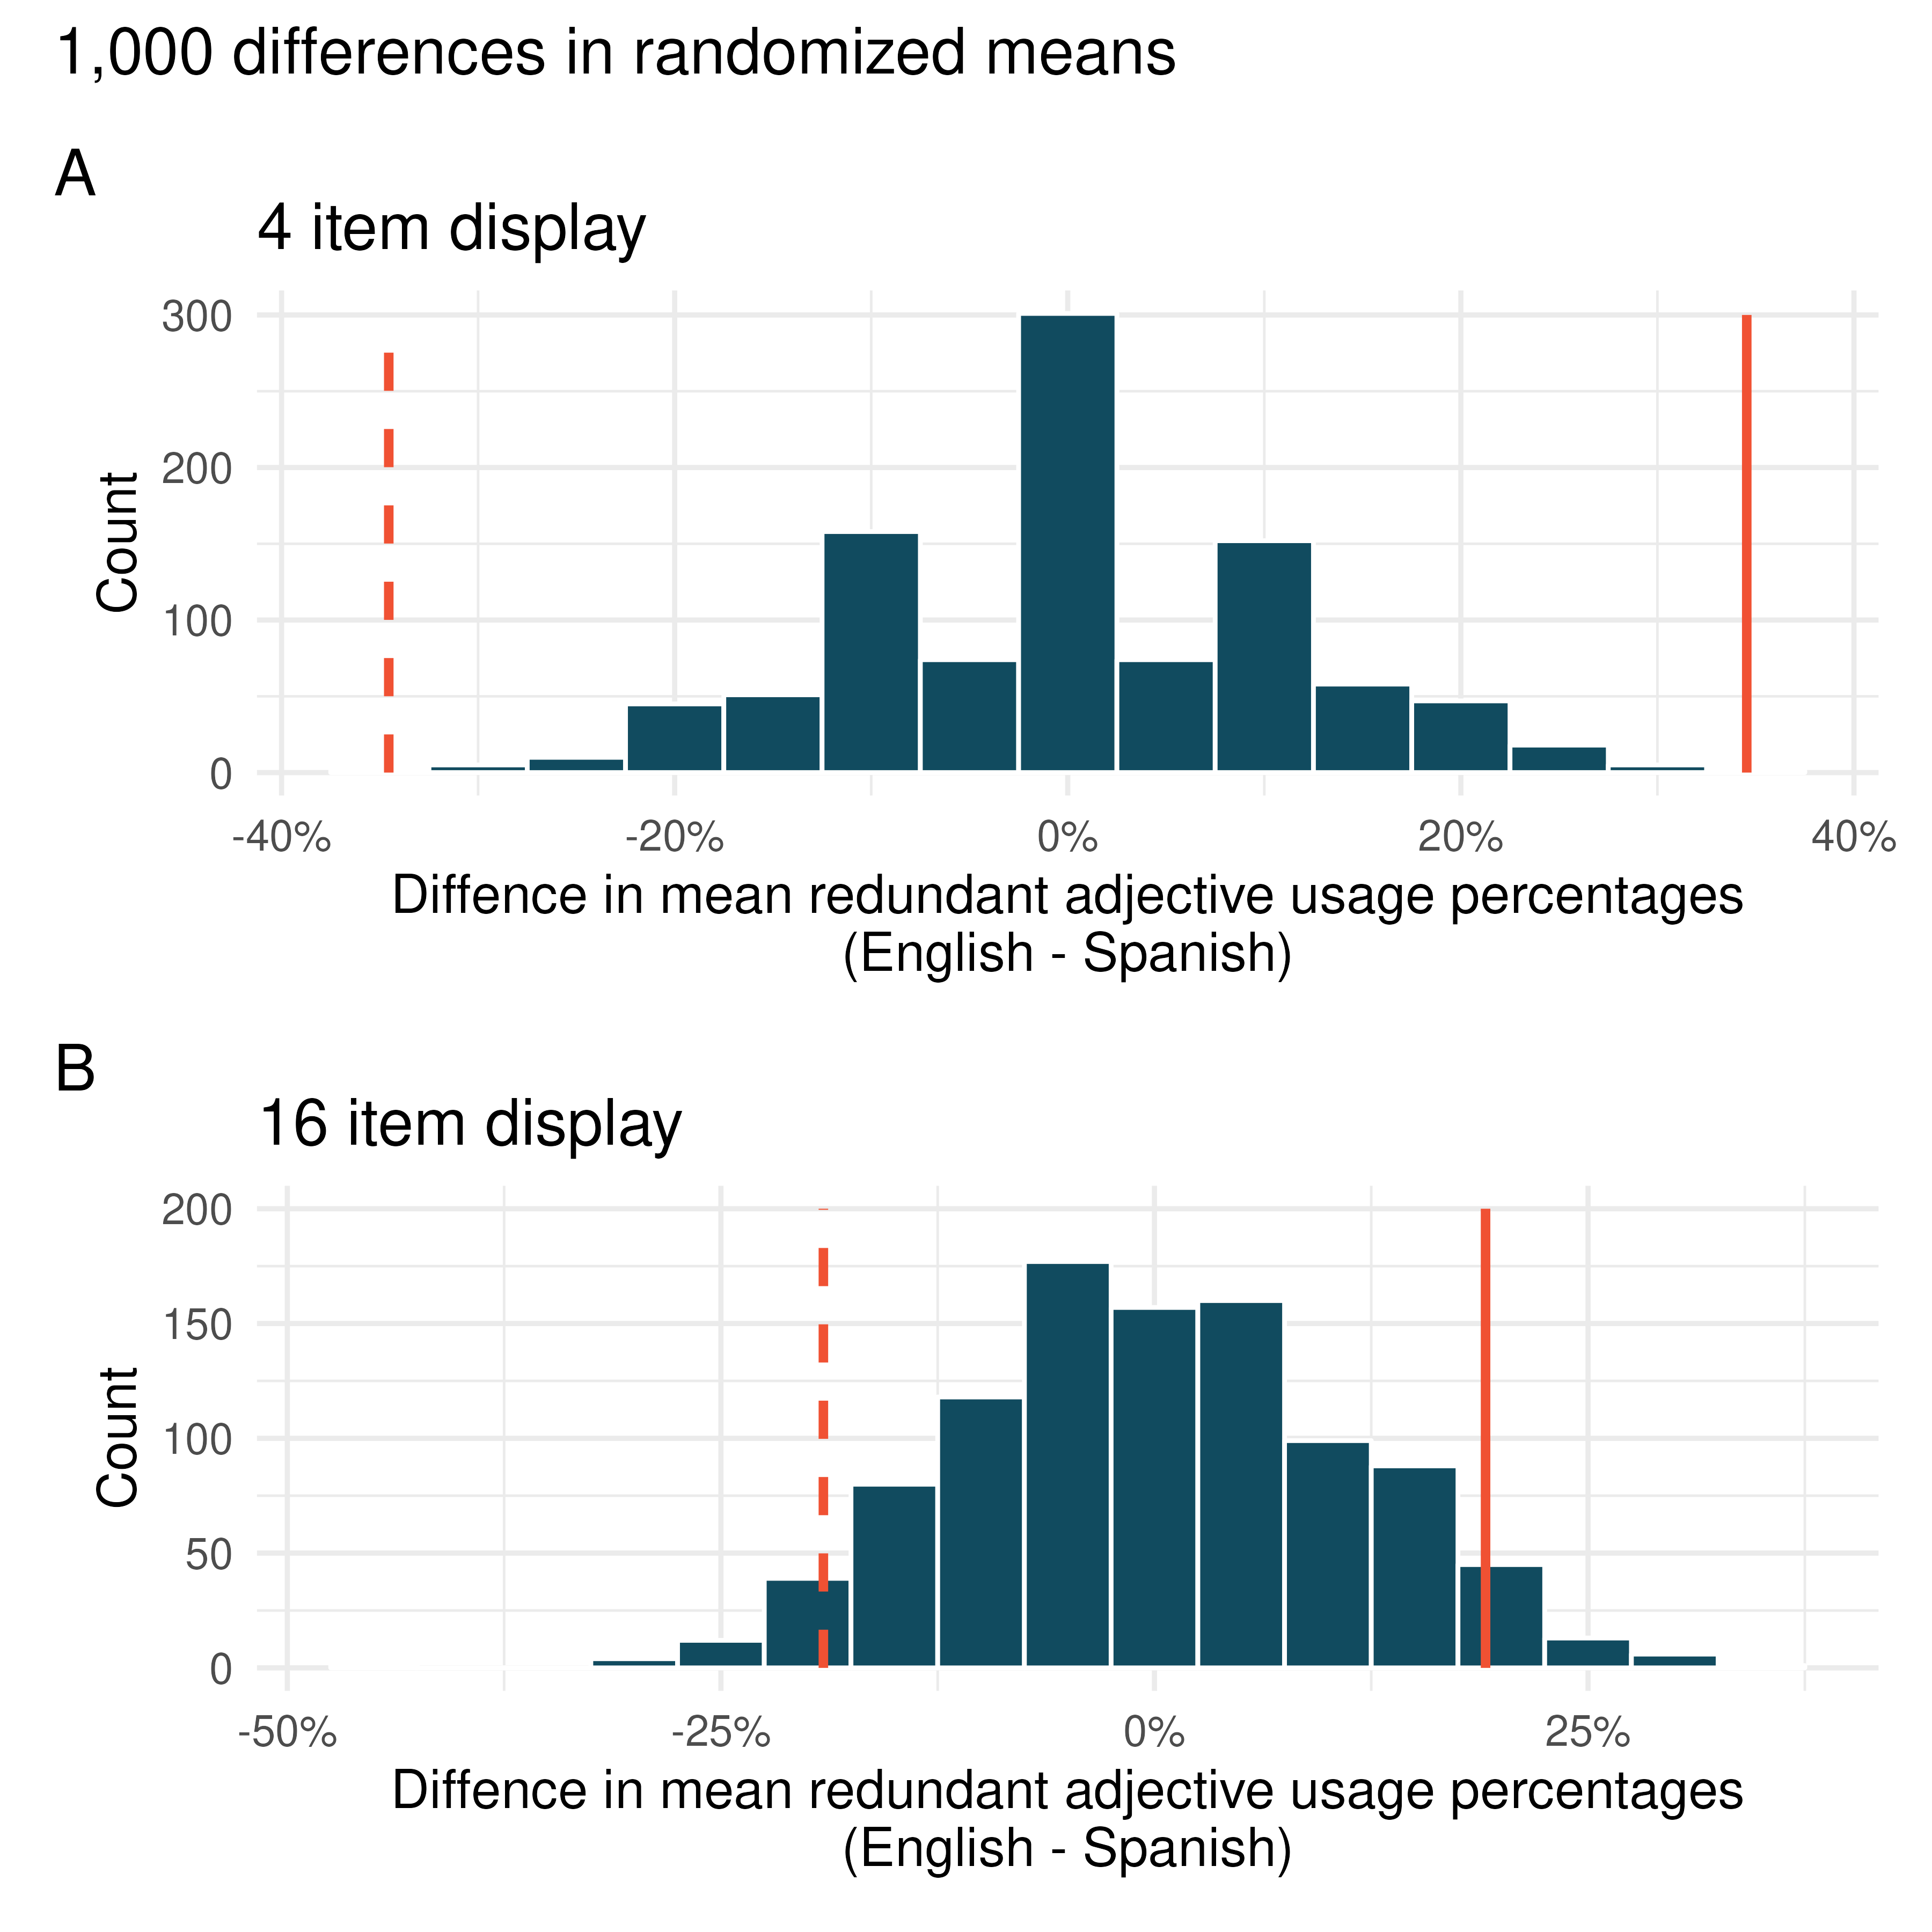 Distributions of 1,000 differences in randomized means of redundant adjective usage percentage between English and Spanish speakers. Plot A shows the differences in 4 item displays and Plot B shows the differences in 16 item displays. In each plot, the observed differences in the sample (solid line) as well as the differences in the other direction (dashed line) are overlaid.